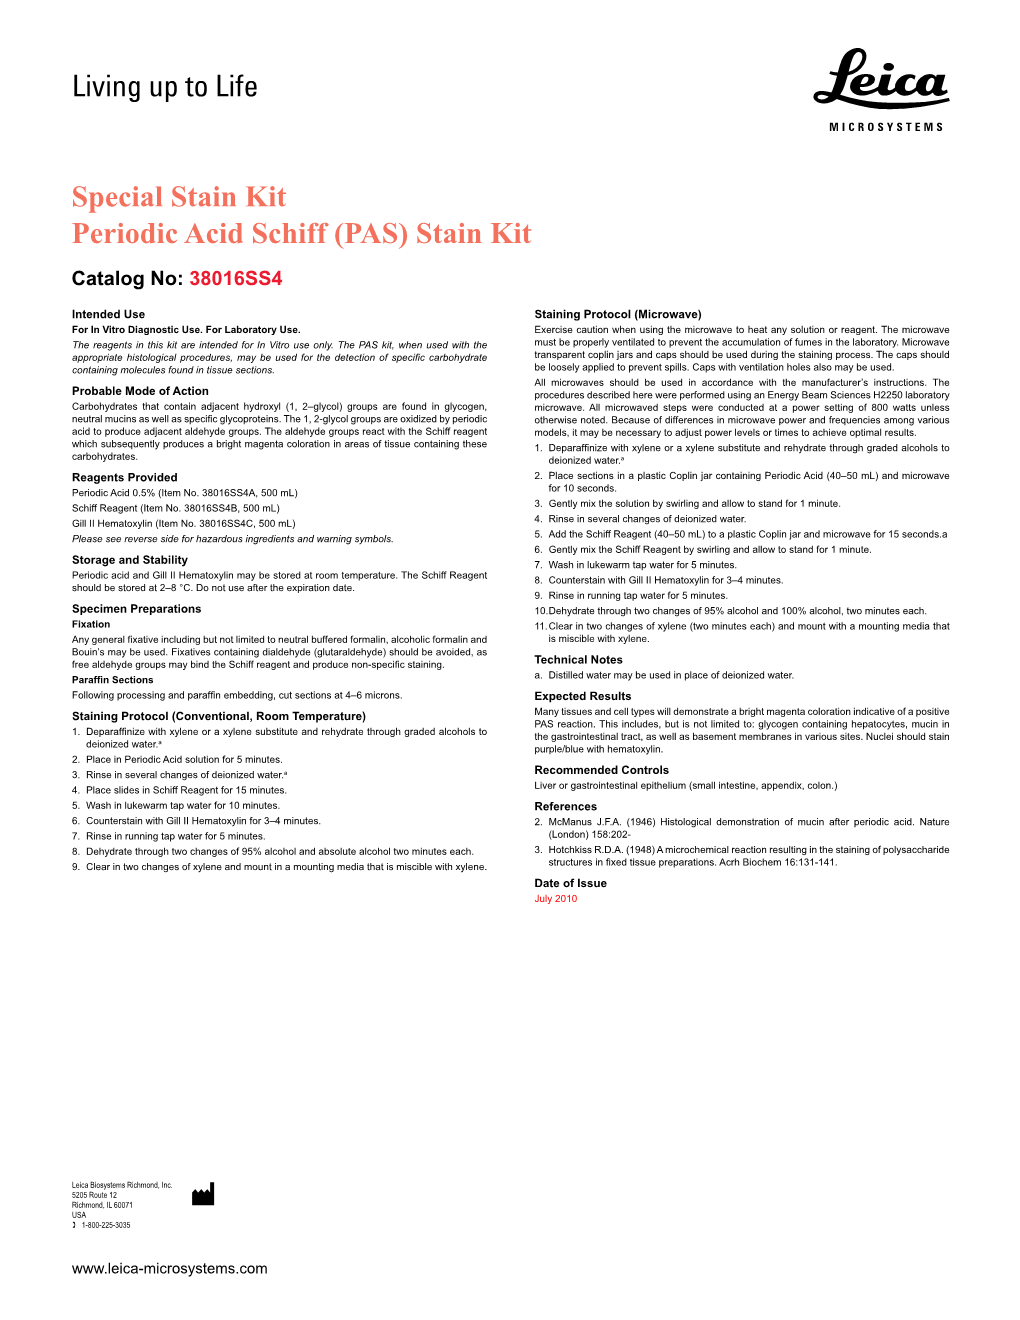 Living up to Life Special Stain Kit Periodic Acid Schiff (PAS) Stain